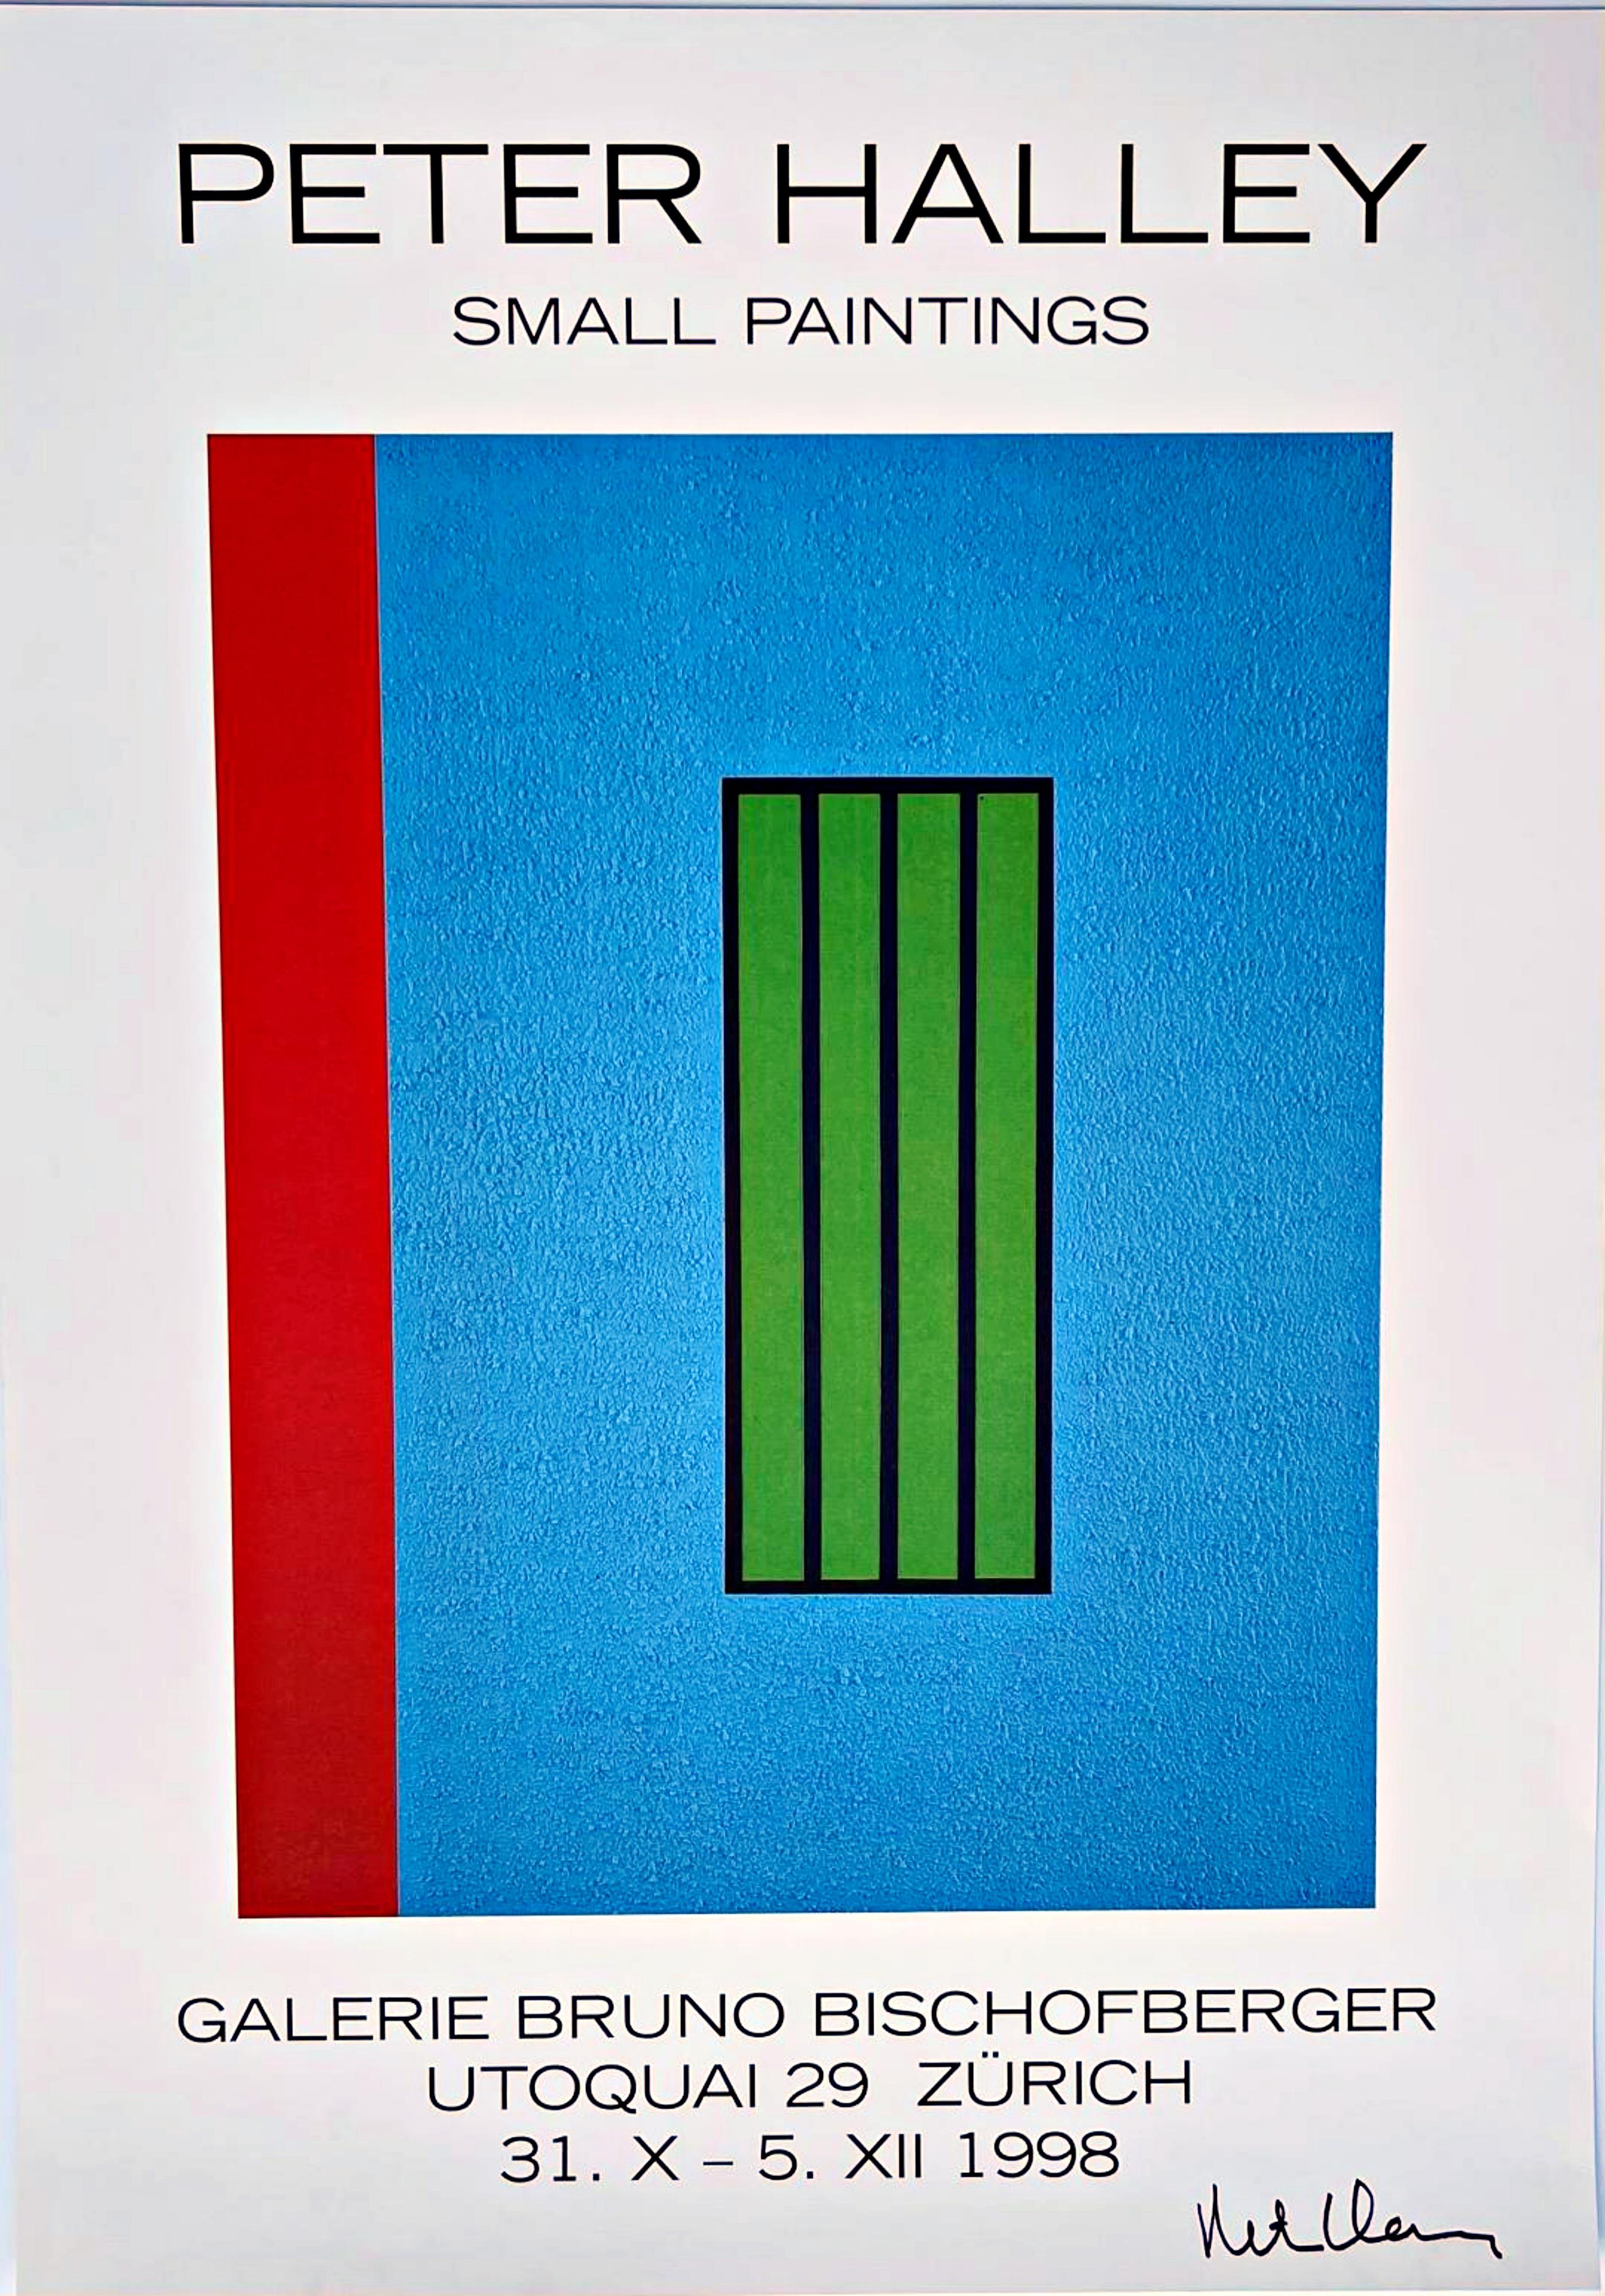 Alpha 137 Gallery is honored to offer this historic offset lithograph of legendary American artist Peter Halley's 1998 exhibition of small paintings at Galerie Bruno Bischofberger in Zurich, Switzerland which the artist hand signed in black